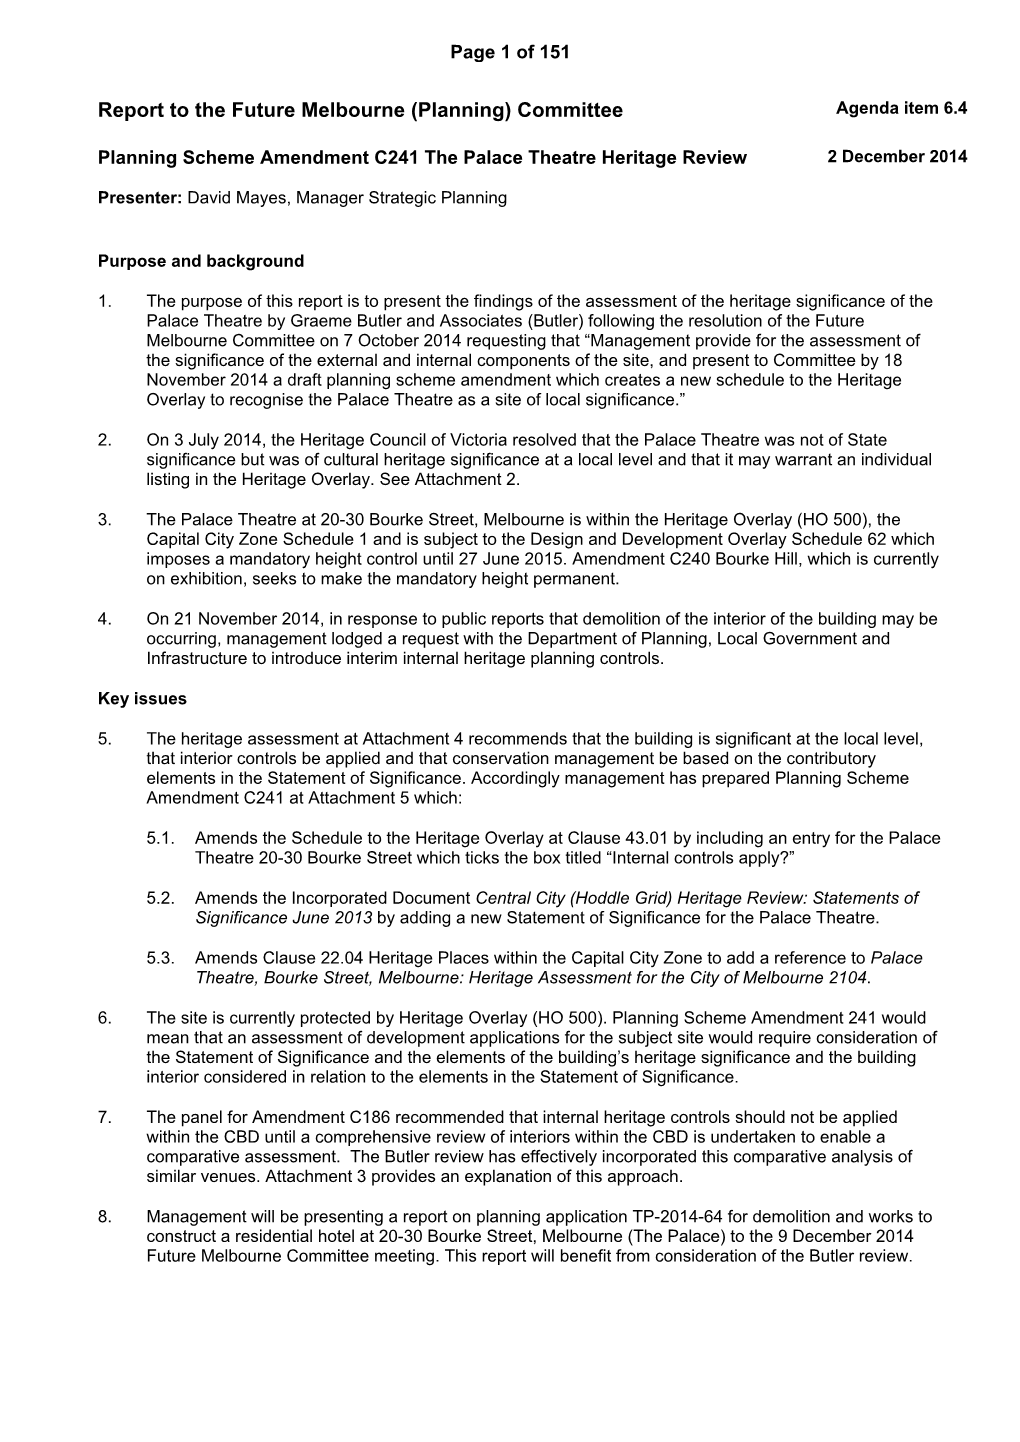 Report to the Future Melbourne (Planning) Committee Agenda Item 6.4